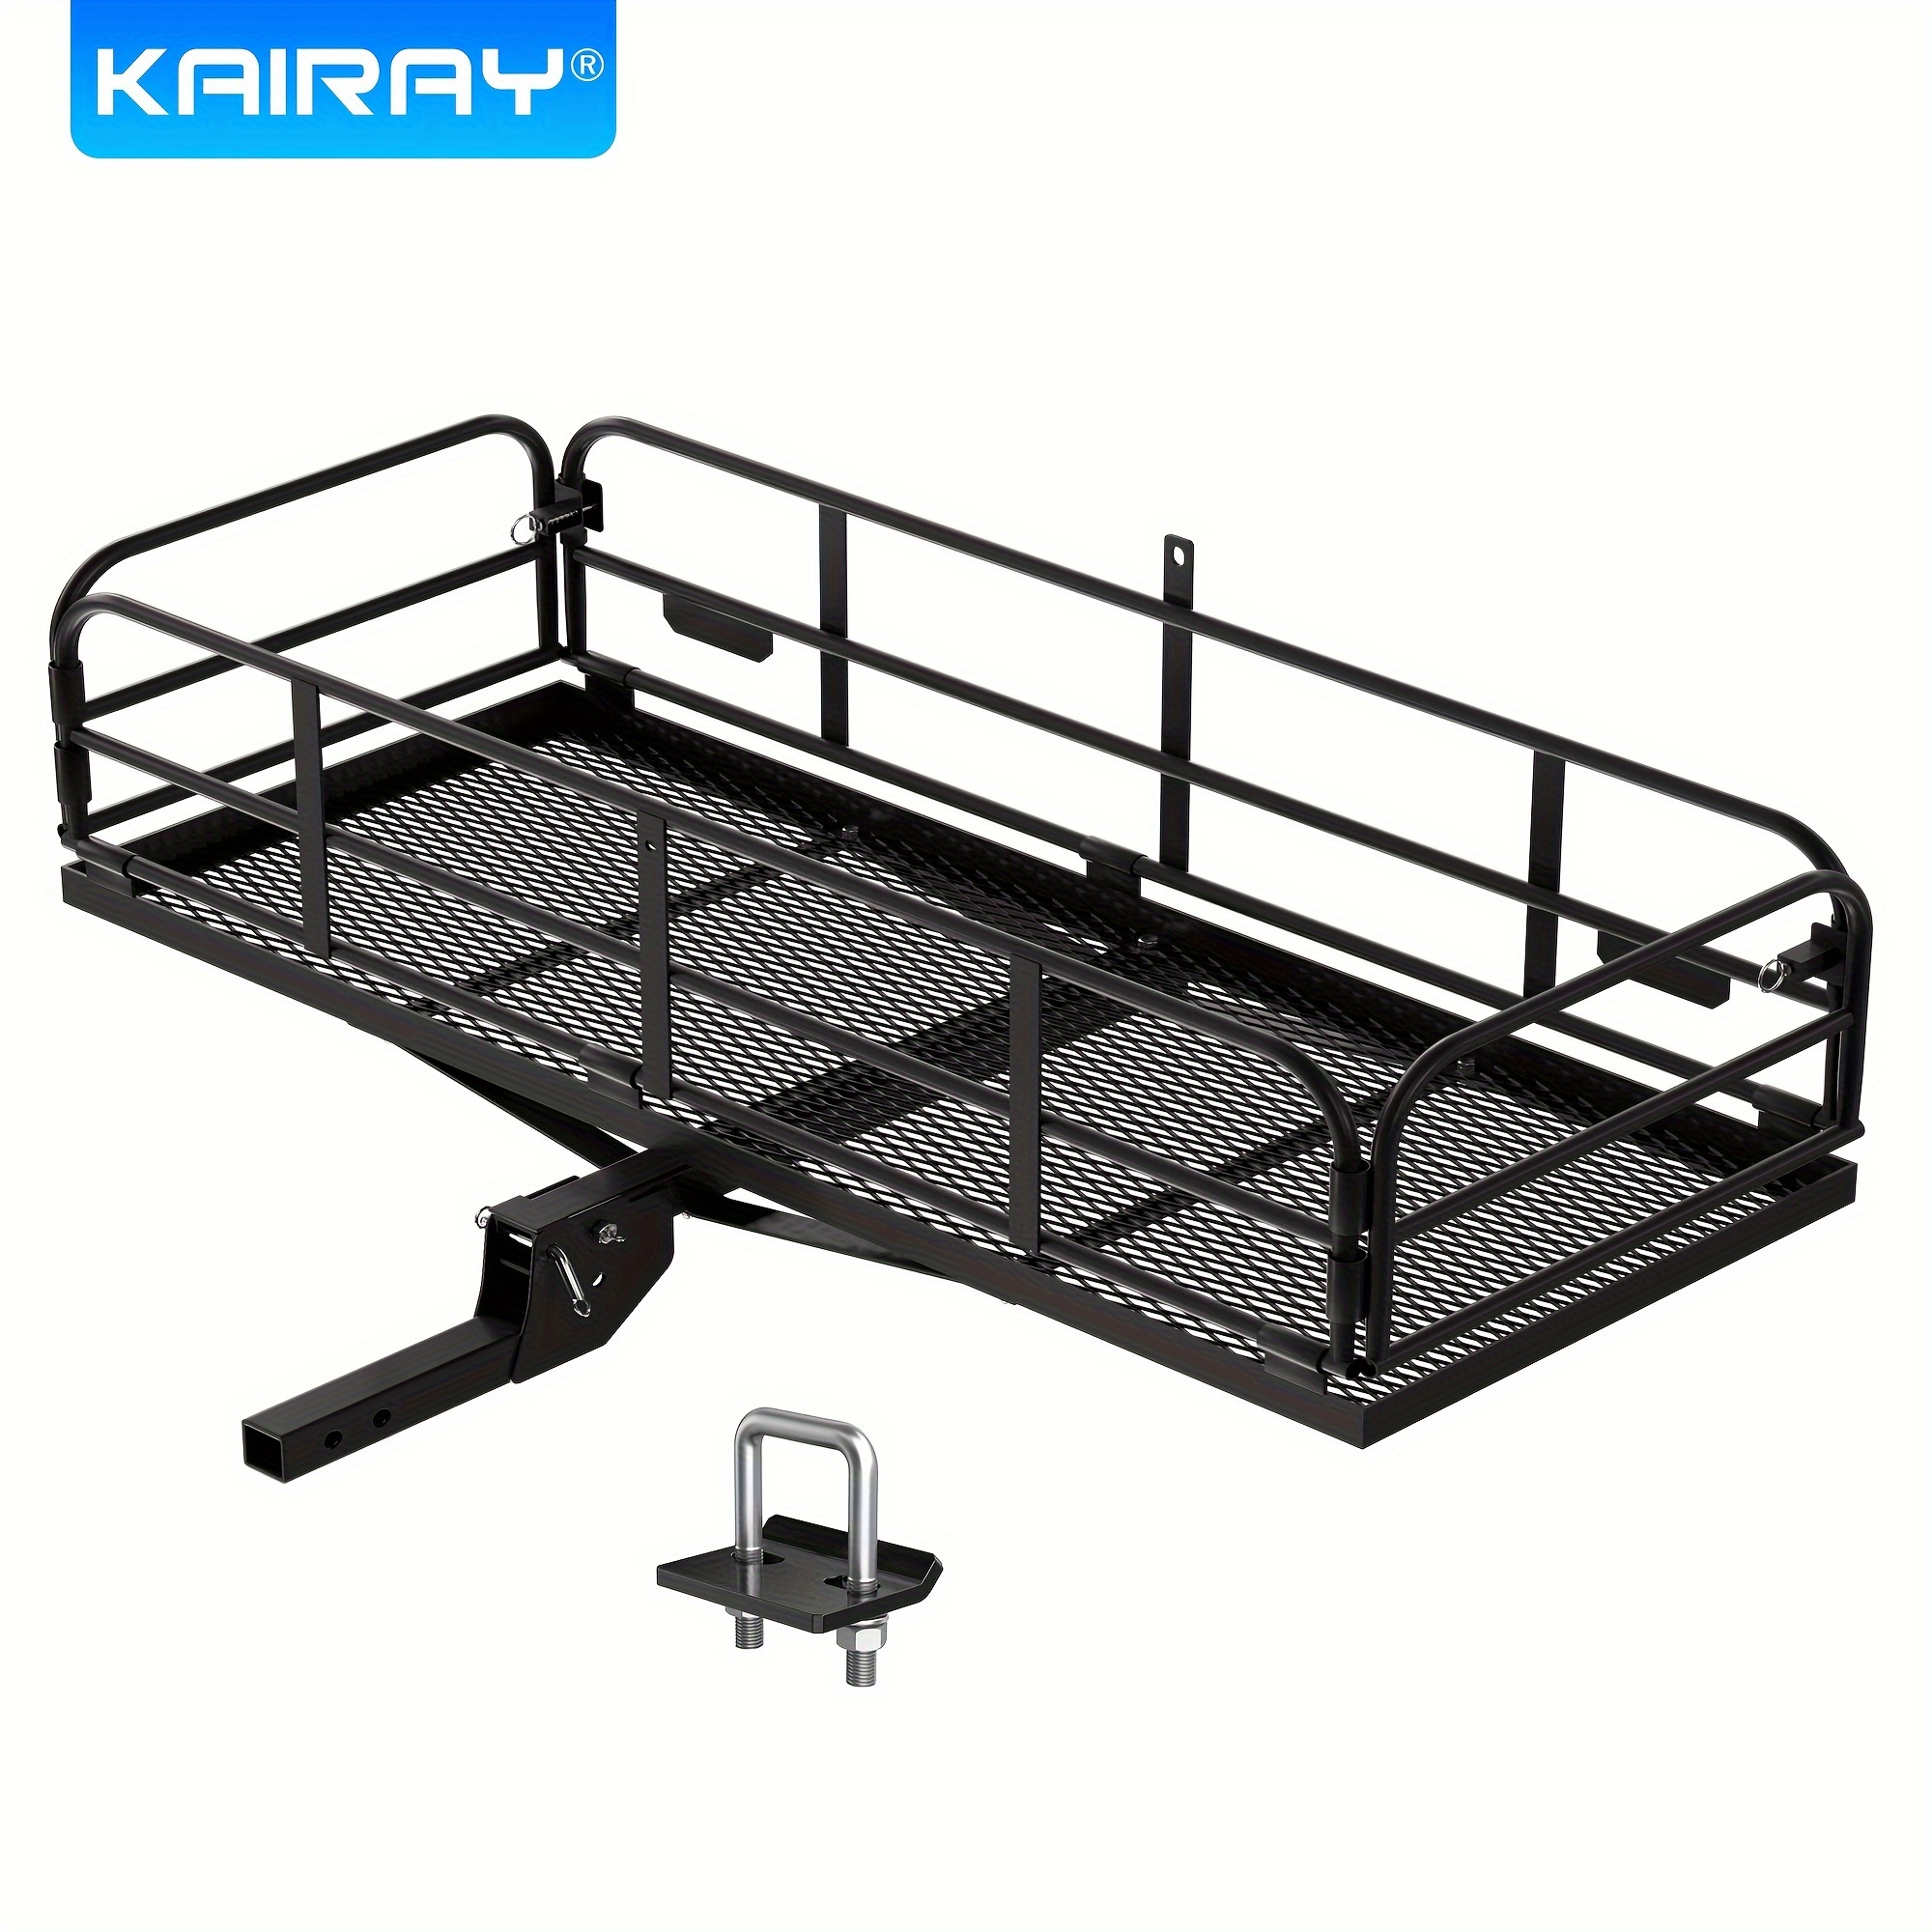 

500 Lbs Heavy Duty Hitch Mount Cargo Carrier 60" X 24" X 14.4" Folding Cargo Rack Rear Luggage Basket Fits 2" Receiver For Car Suv Camping Traveling With Hitch Tightener